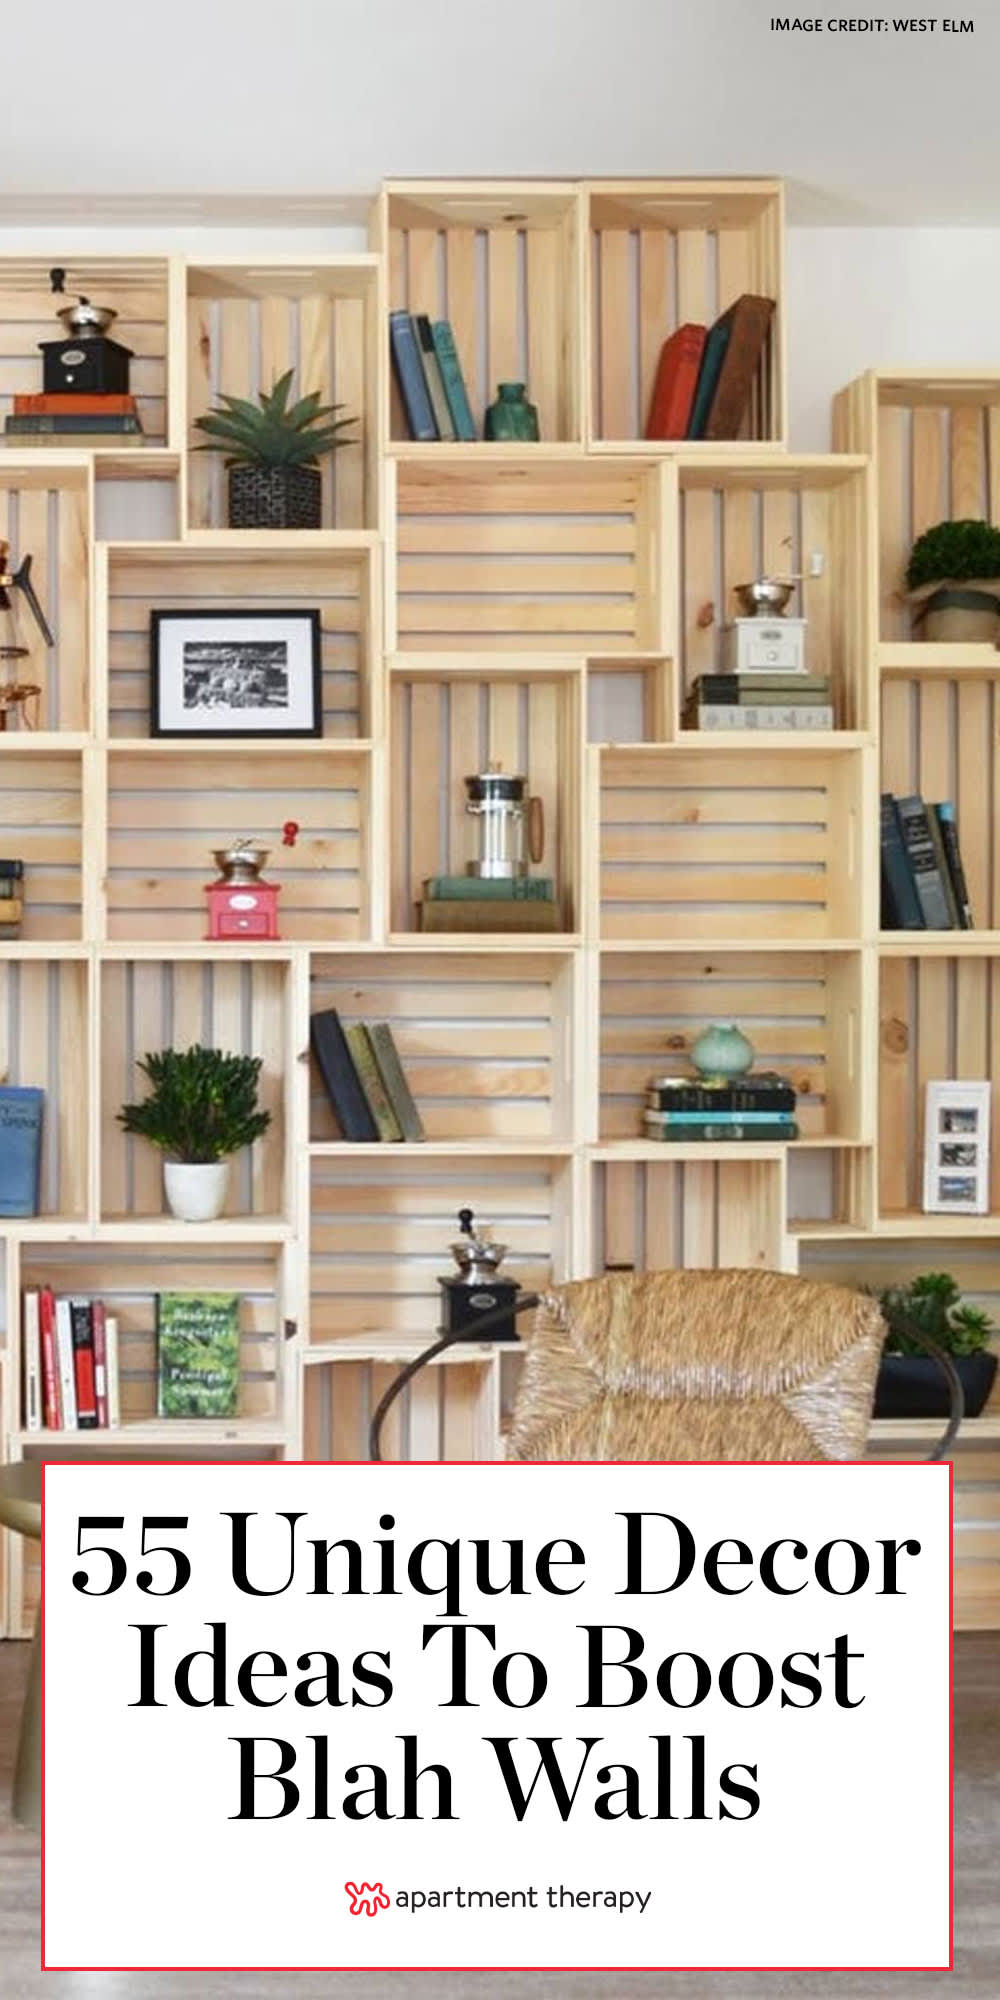 Clean Shelf Wall Picture Ideas toronto 2021